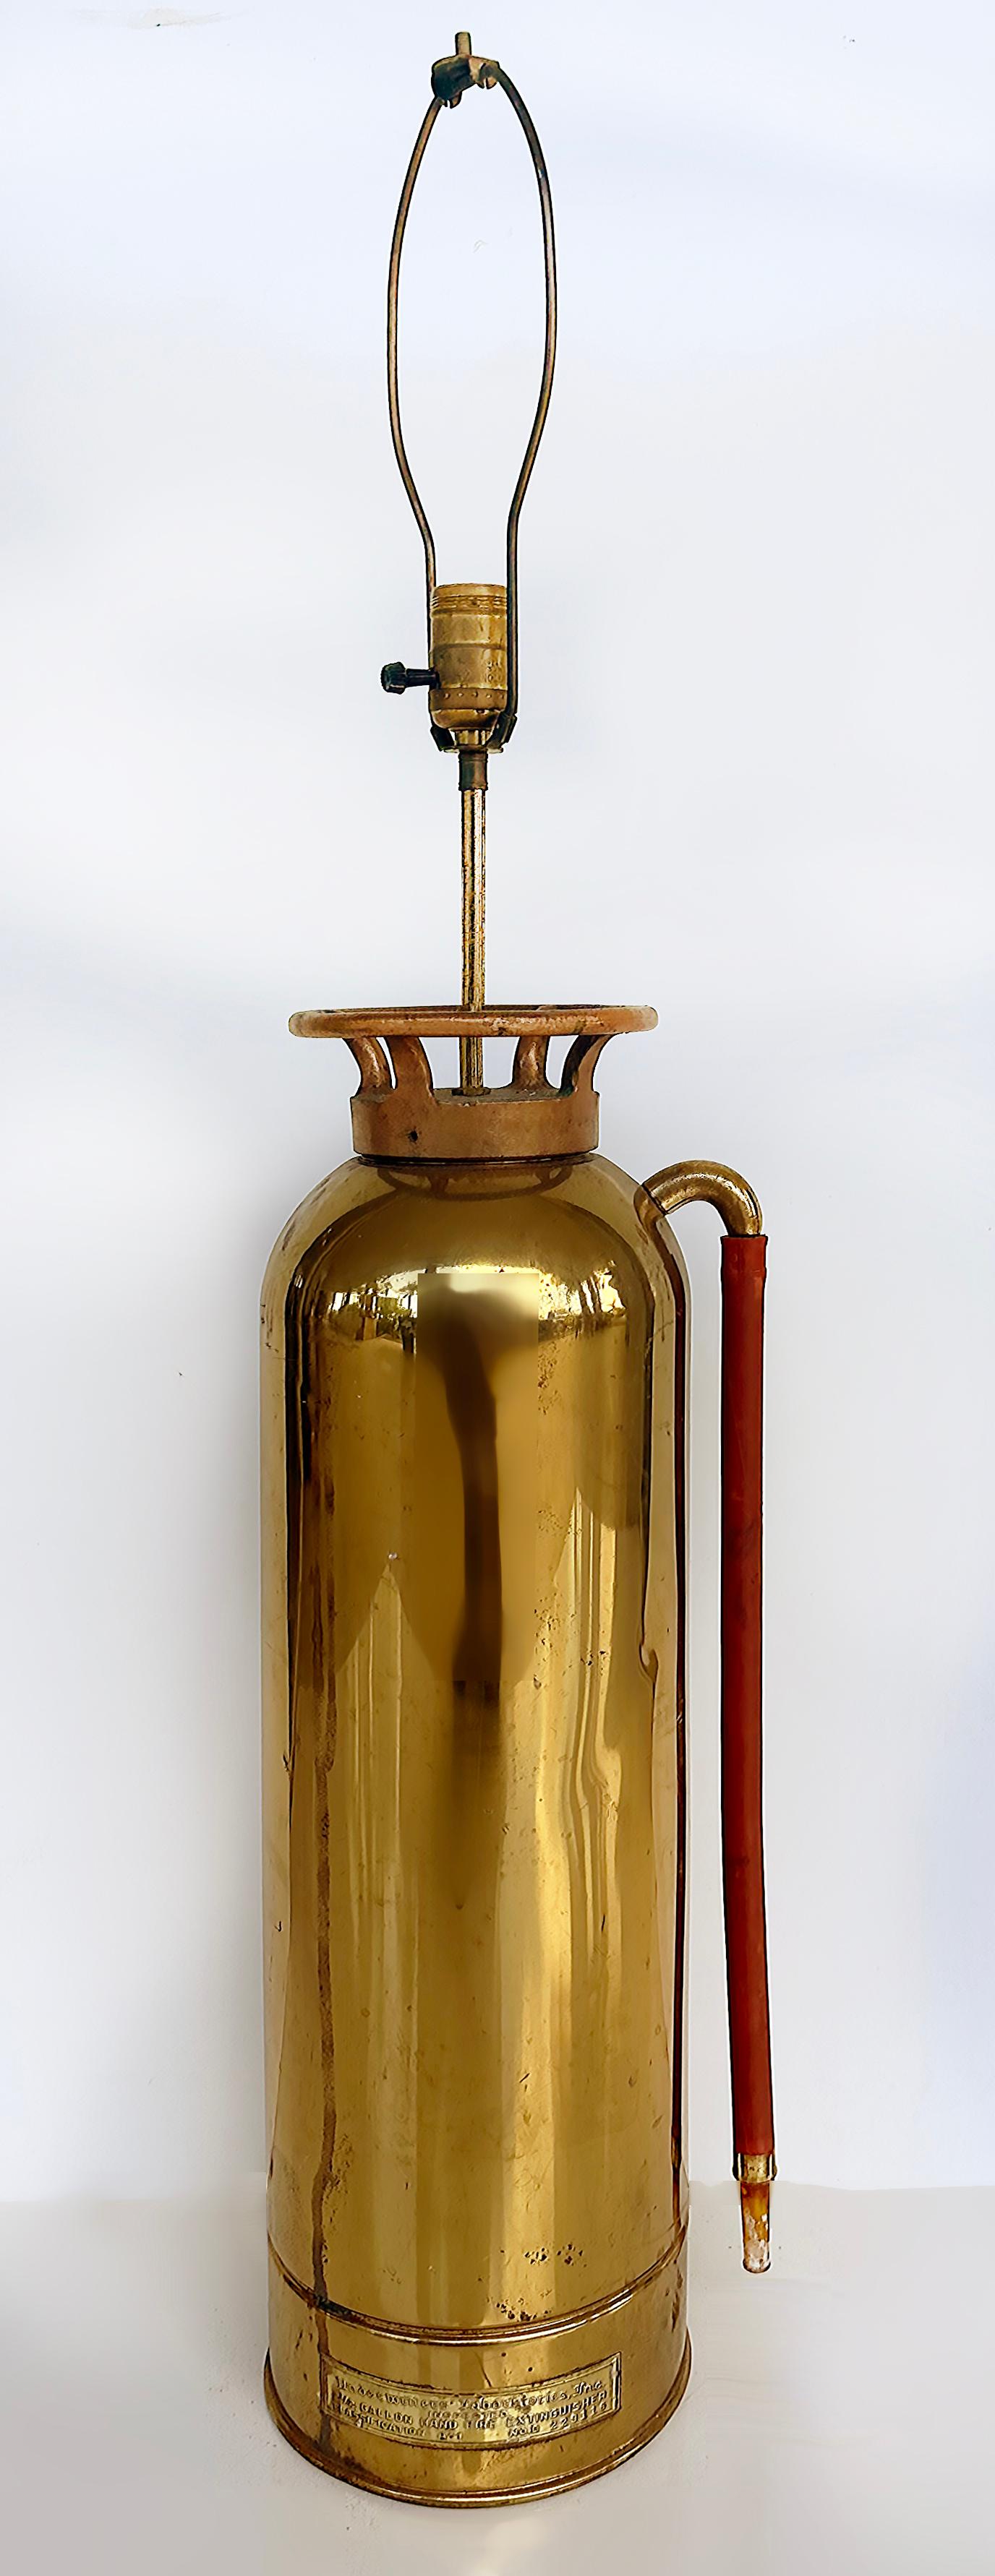 Antique Brass and Copper Fire Extinguisher Table Lamp

Offered for sale is an antique polished brass and copper fire extinguisher that was converted into a table lamp during the mid-20th century. The extinguisher has an Underwriters Laboratory